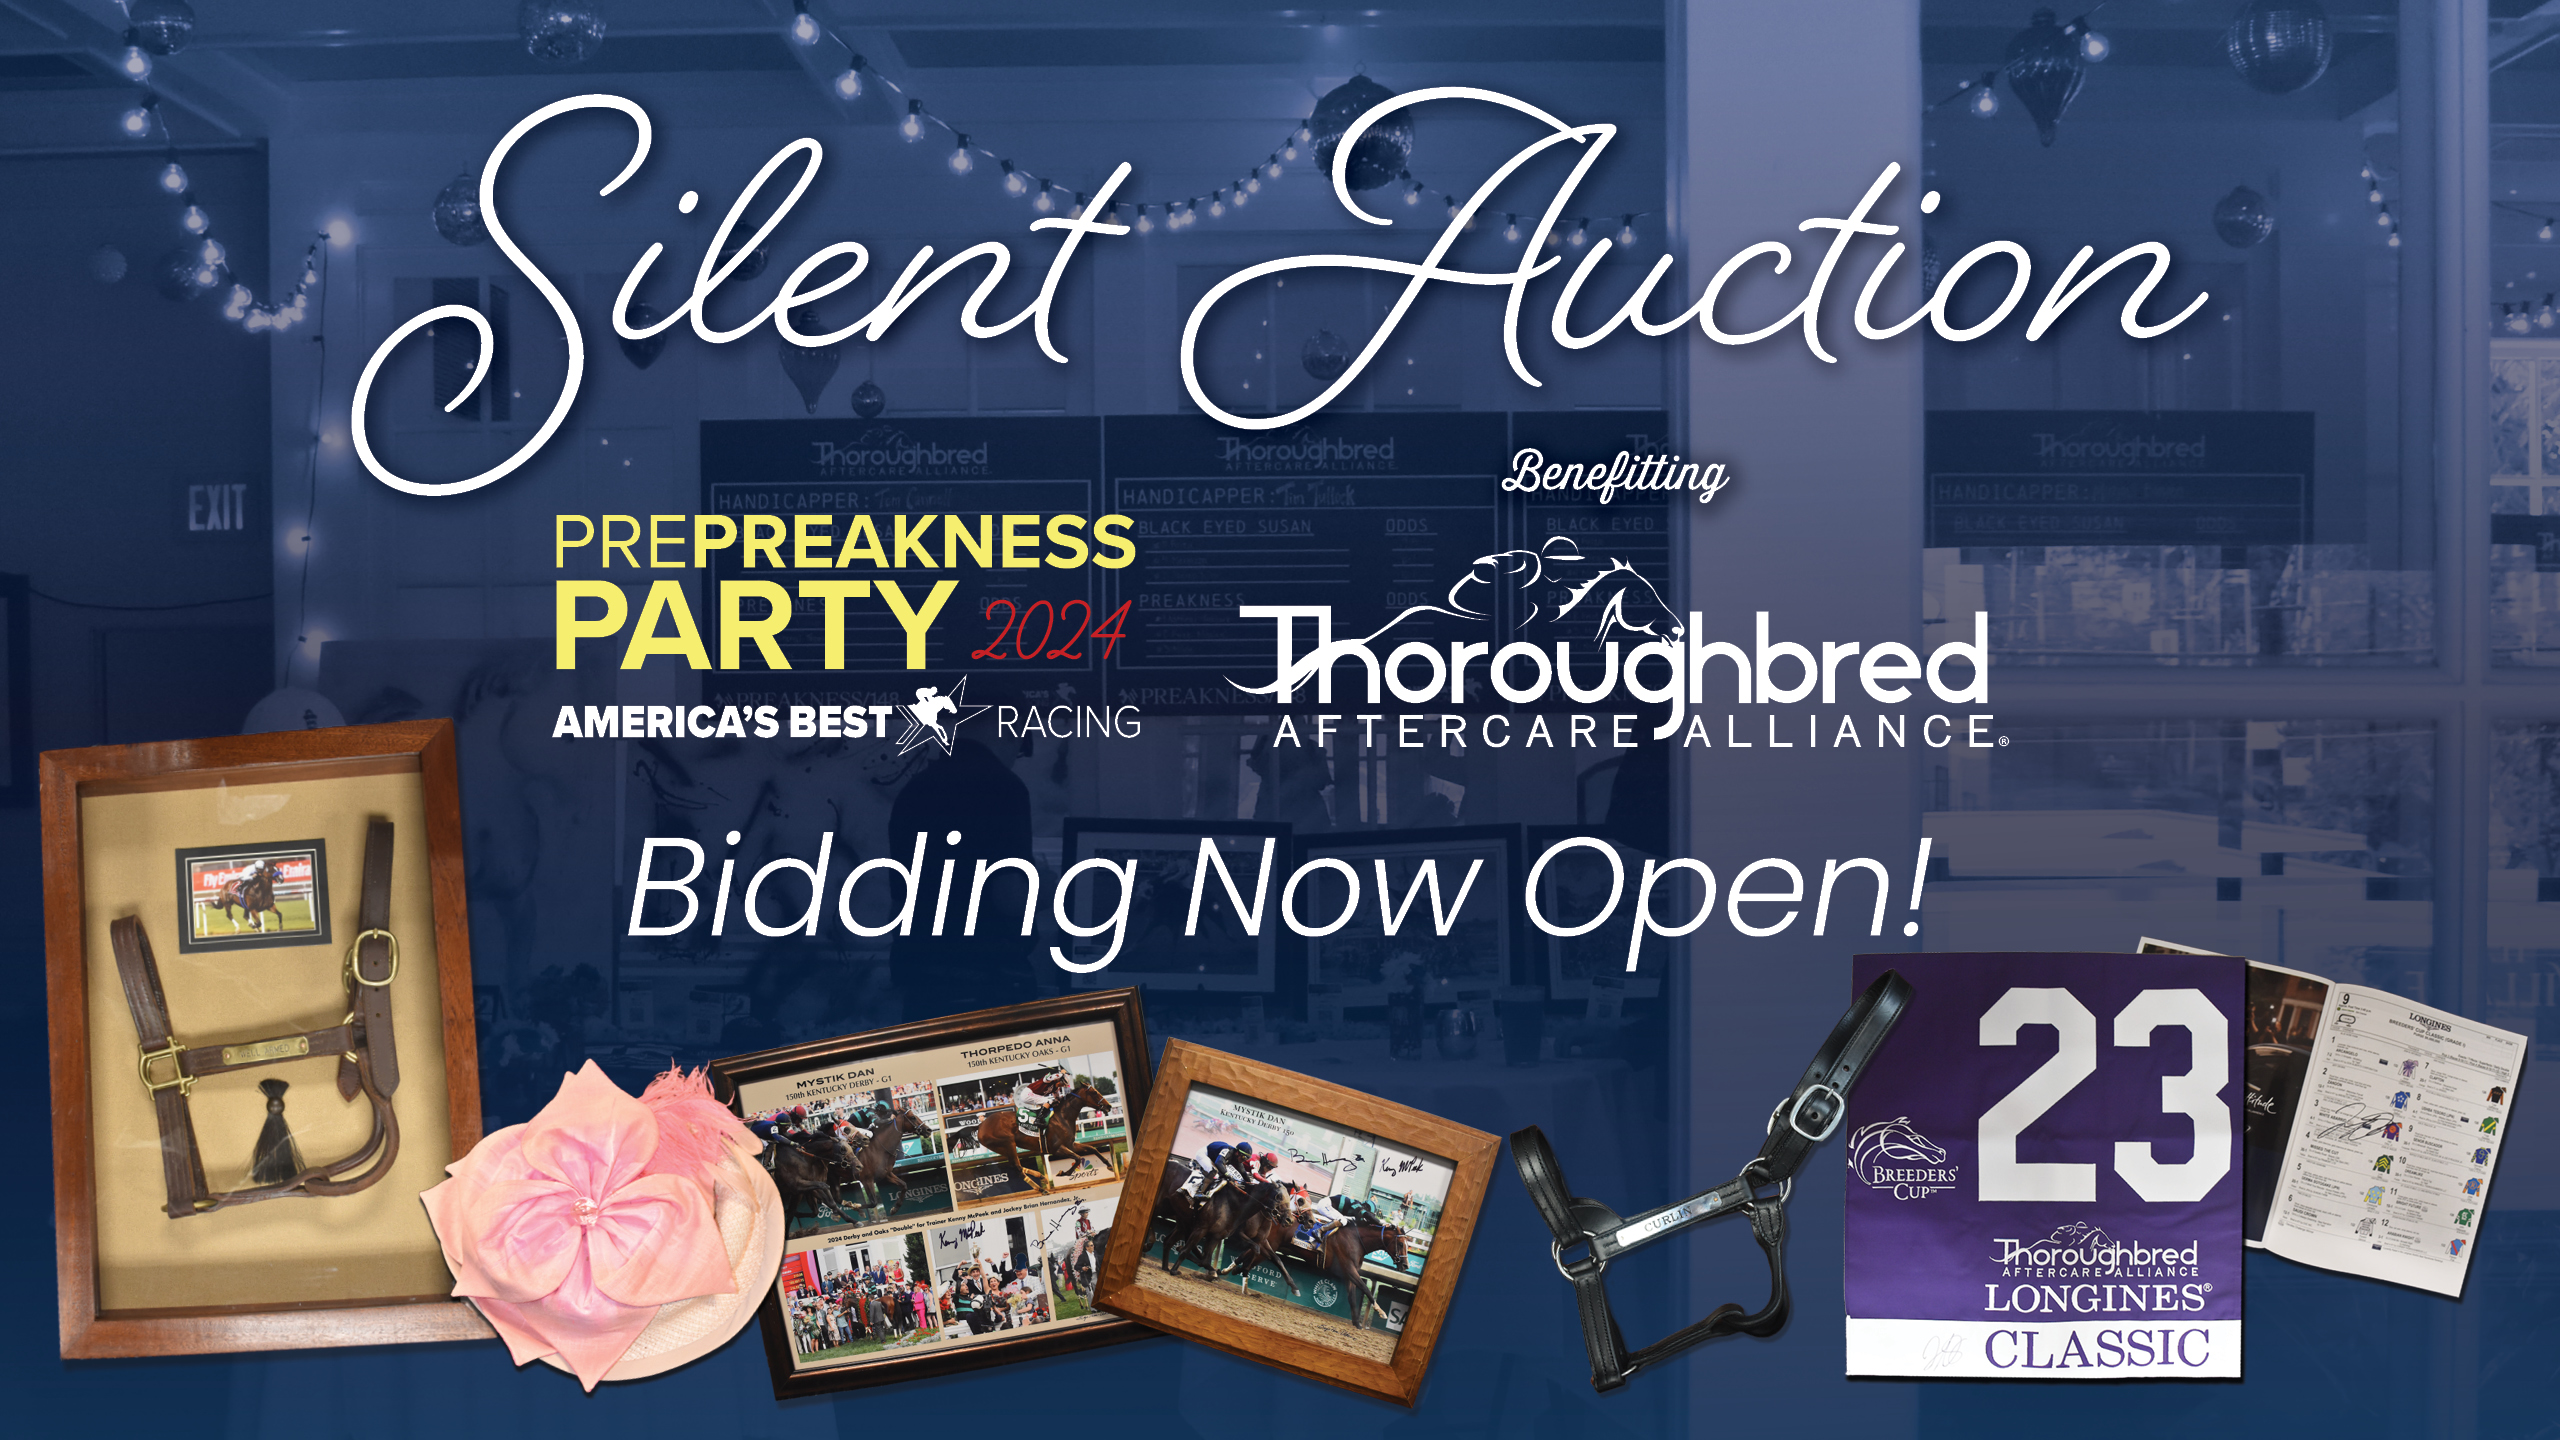 Bidding Now Open for Silent Auction to Benefit Thoroughbred Aftercare Alliance